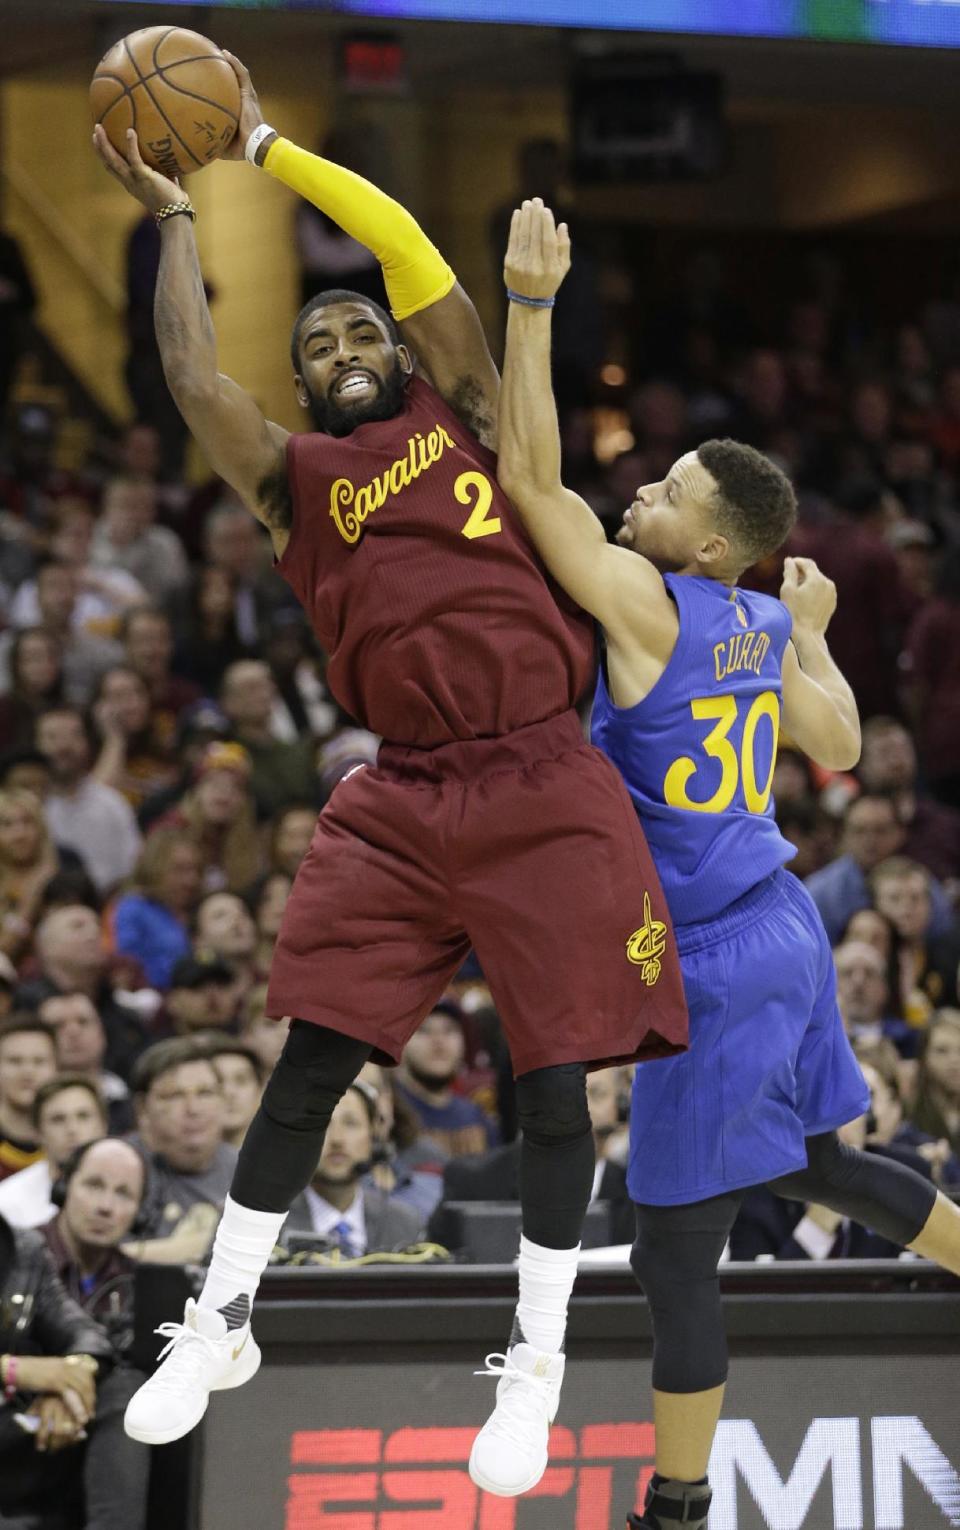 Cleveland Cavaliers' Kyrie Irving (2) passes over Golden State Warriors' Stephen Curry (30) in the first half of an NBA basketball game, Sunday, Dec. 25, 2016, in Cleveland. (AP Photo/Tony Dejak)